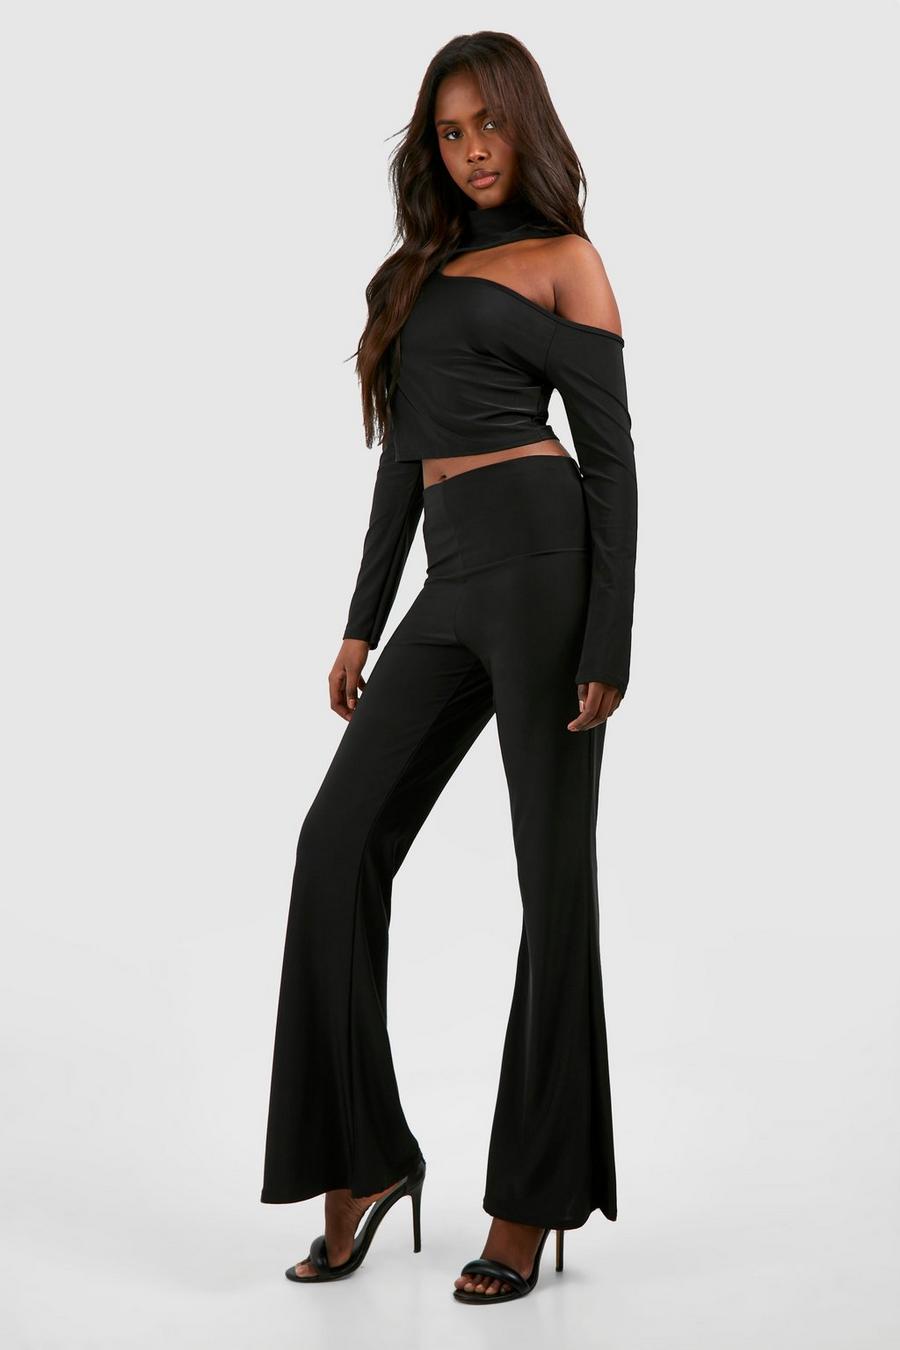 Black High Neck Cut Out Long Sleeve Top & Flared Pants image number 1